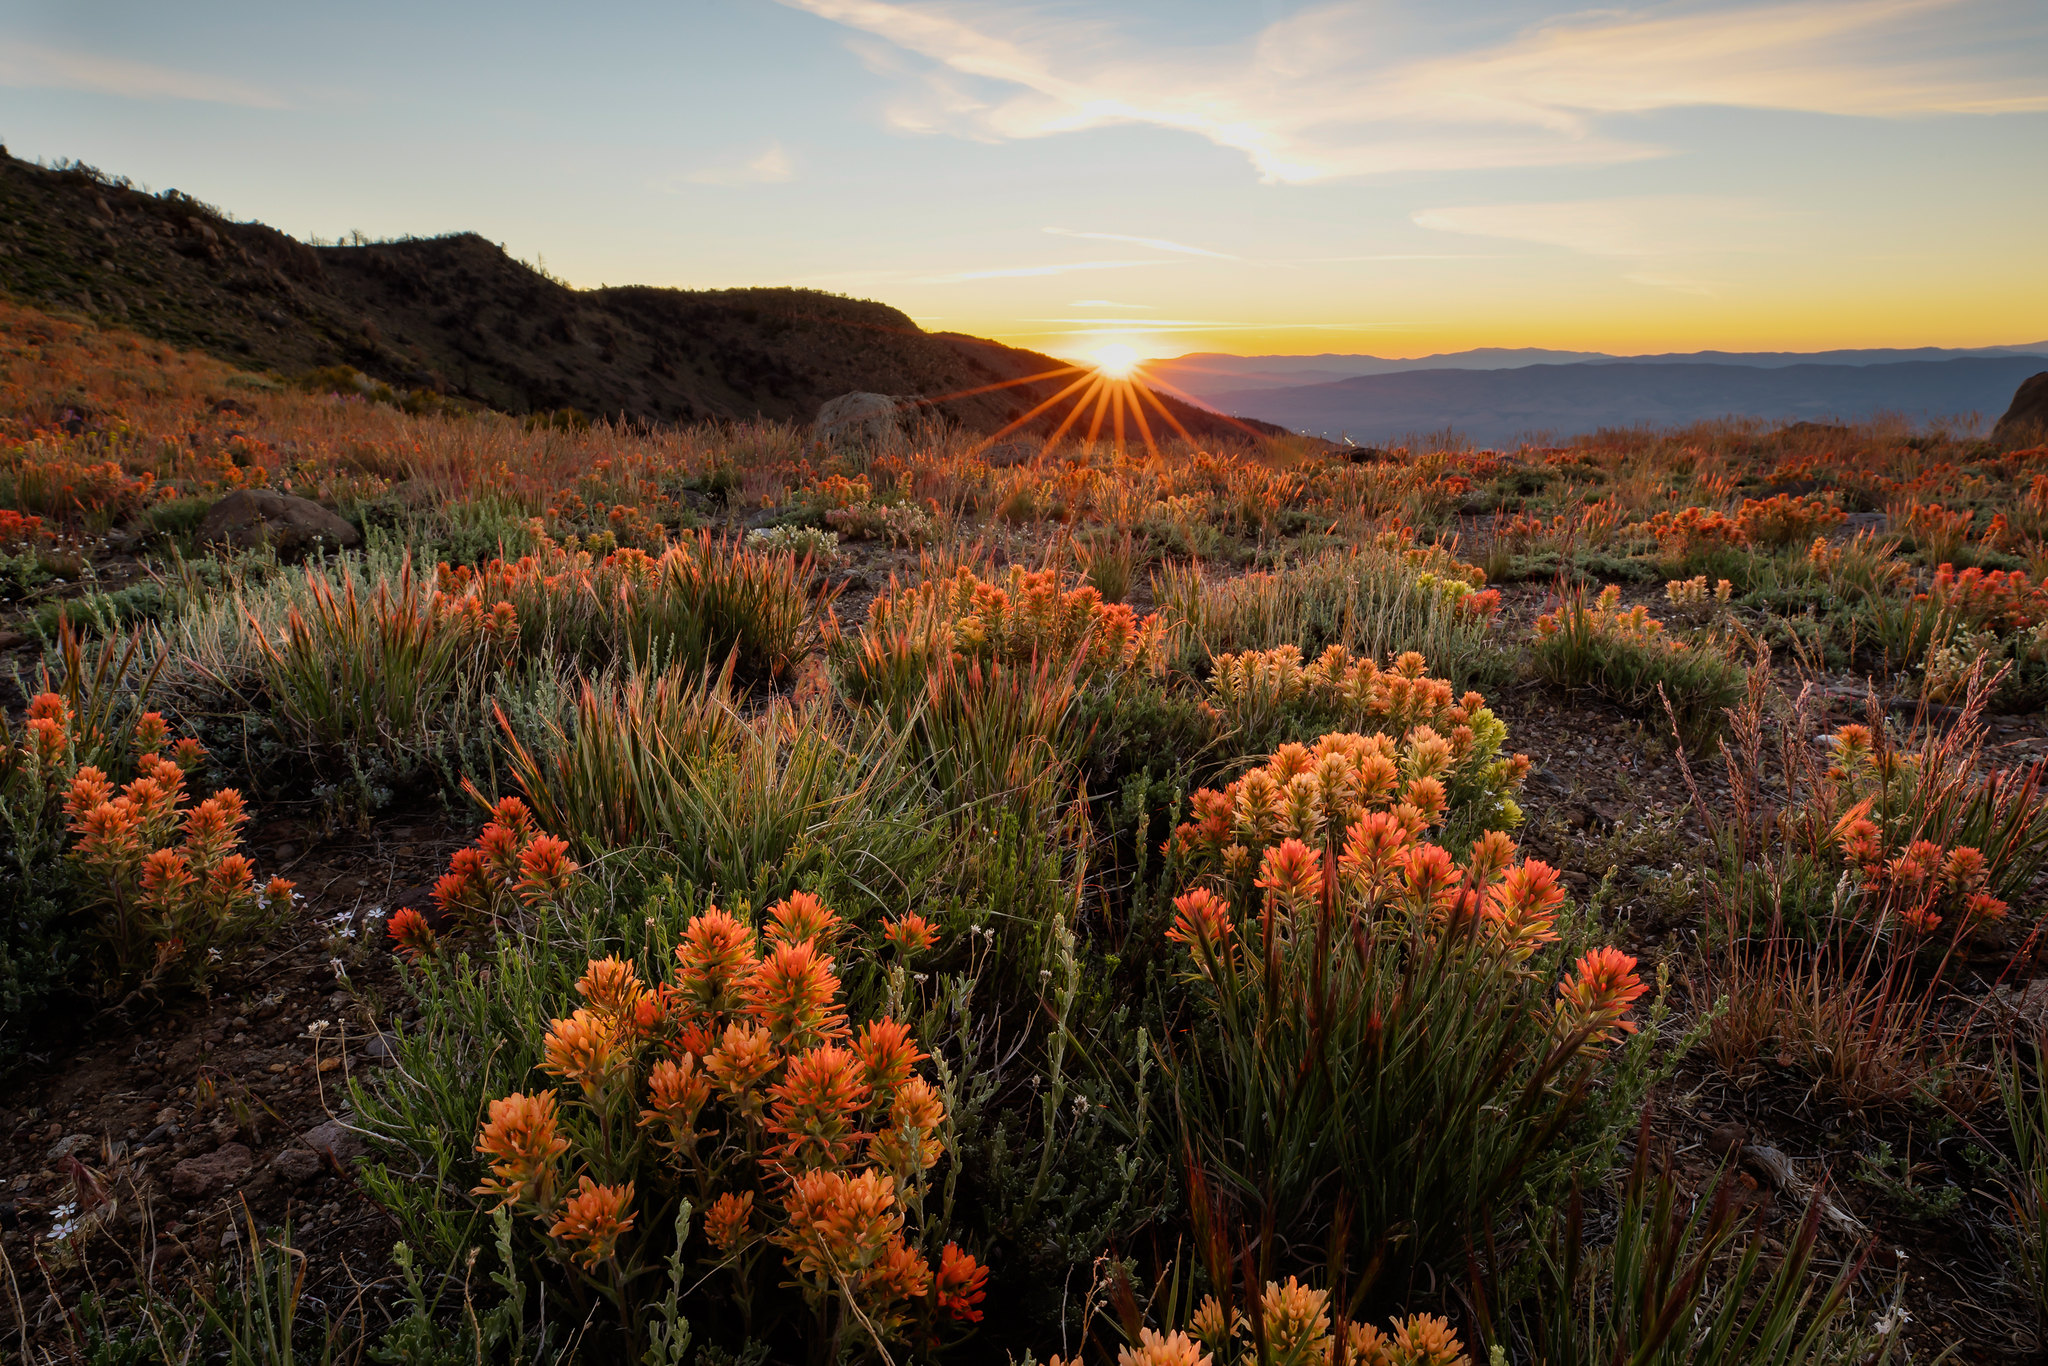 Wildflowers on mountainside. Sun setting in the distance